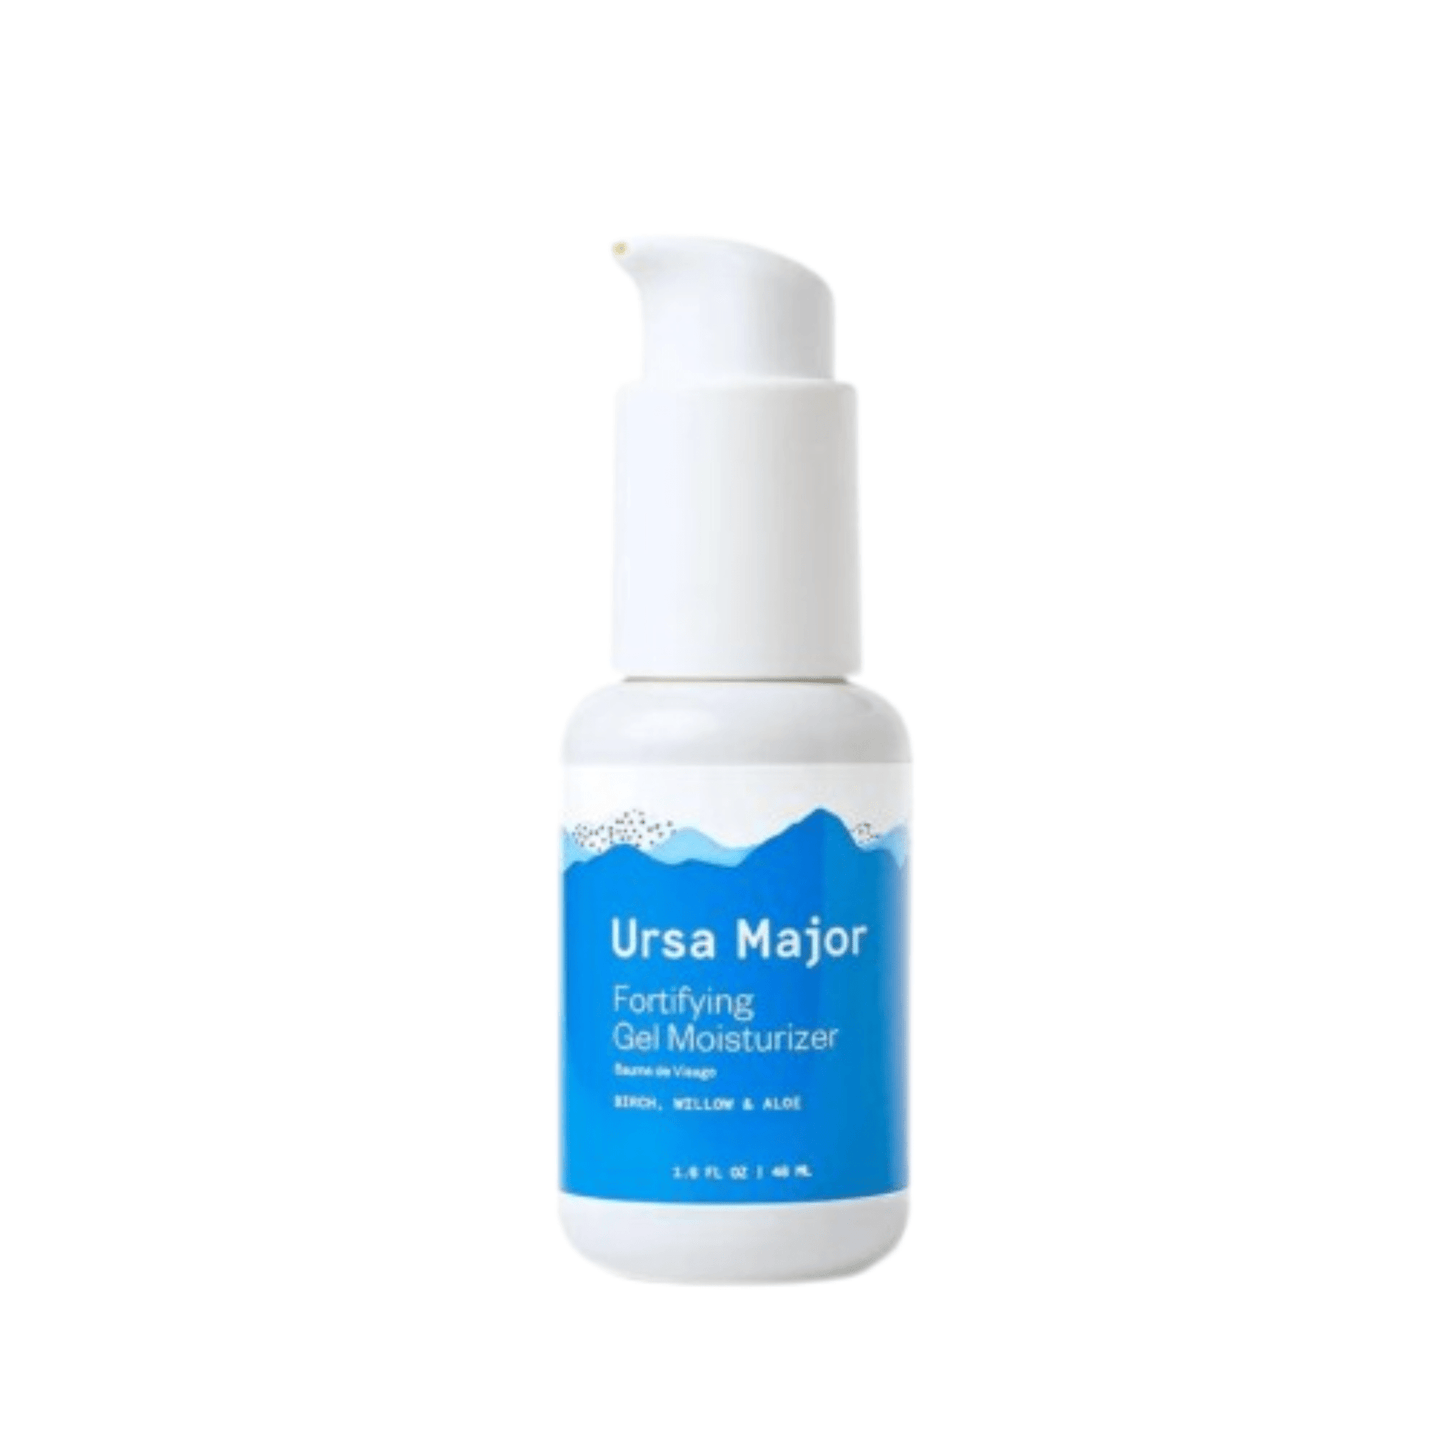 Primary Image of Fortifying Gel Moisturizer